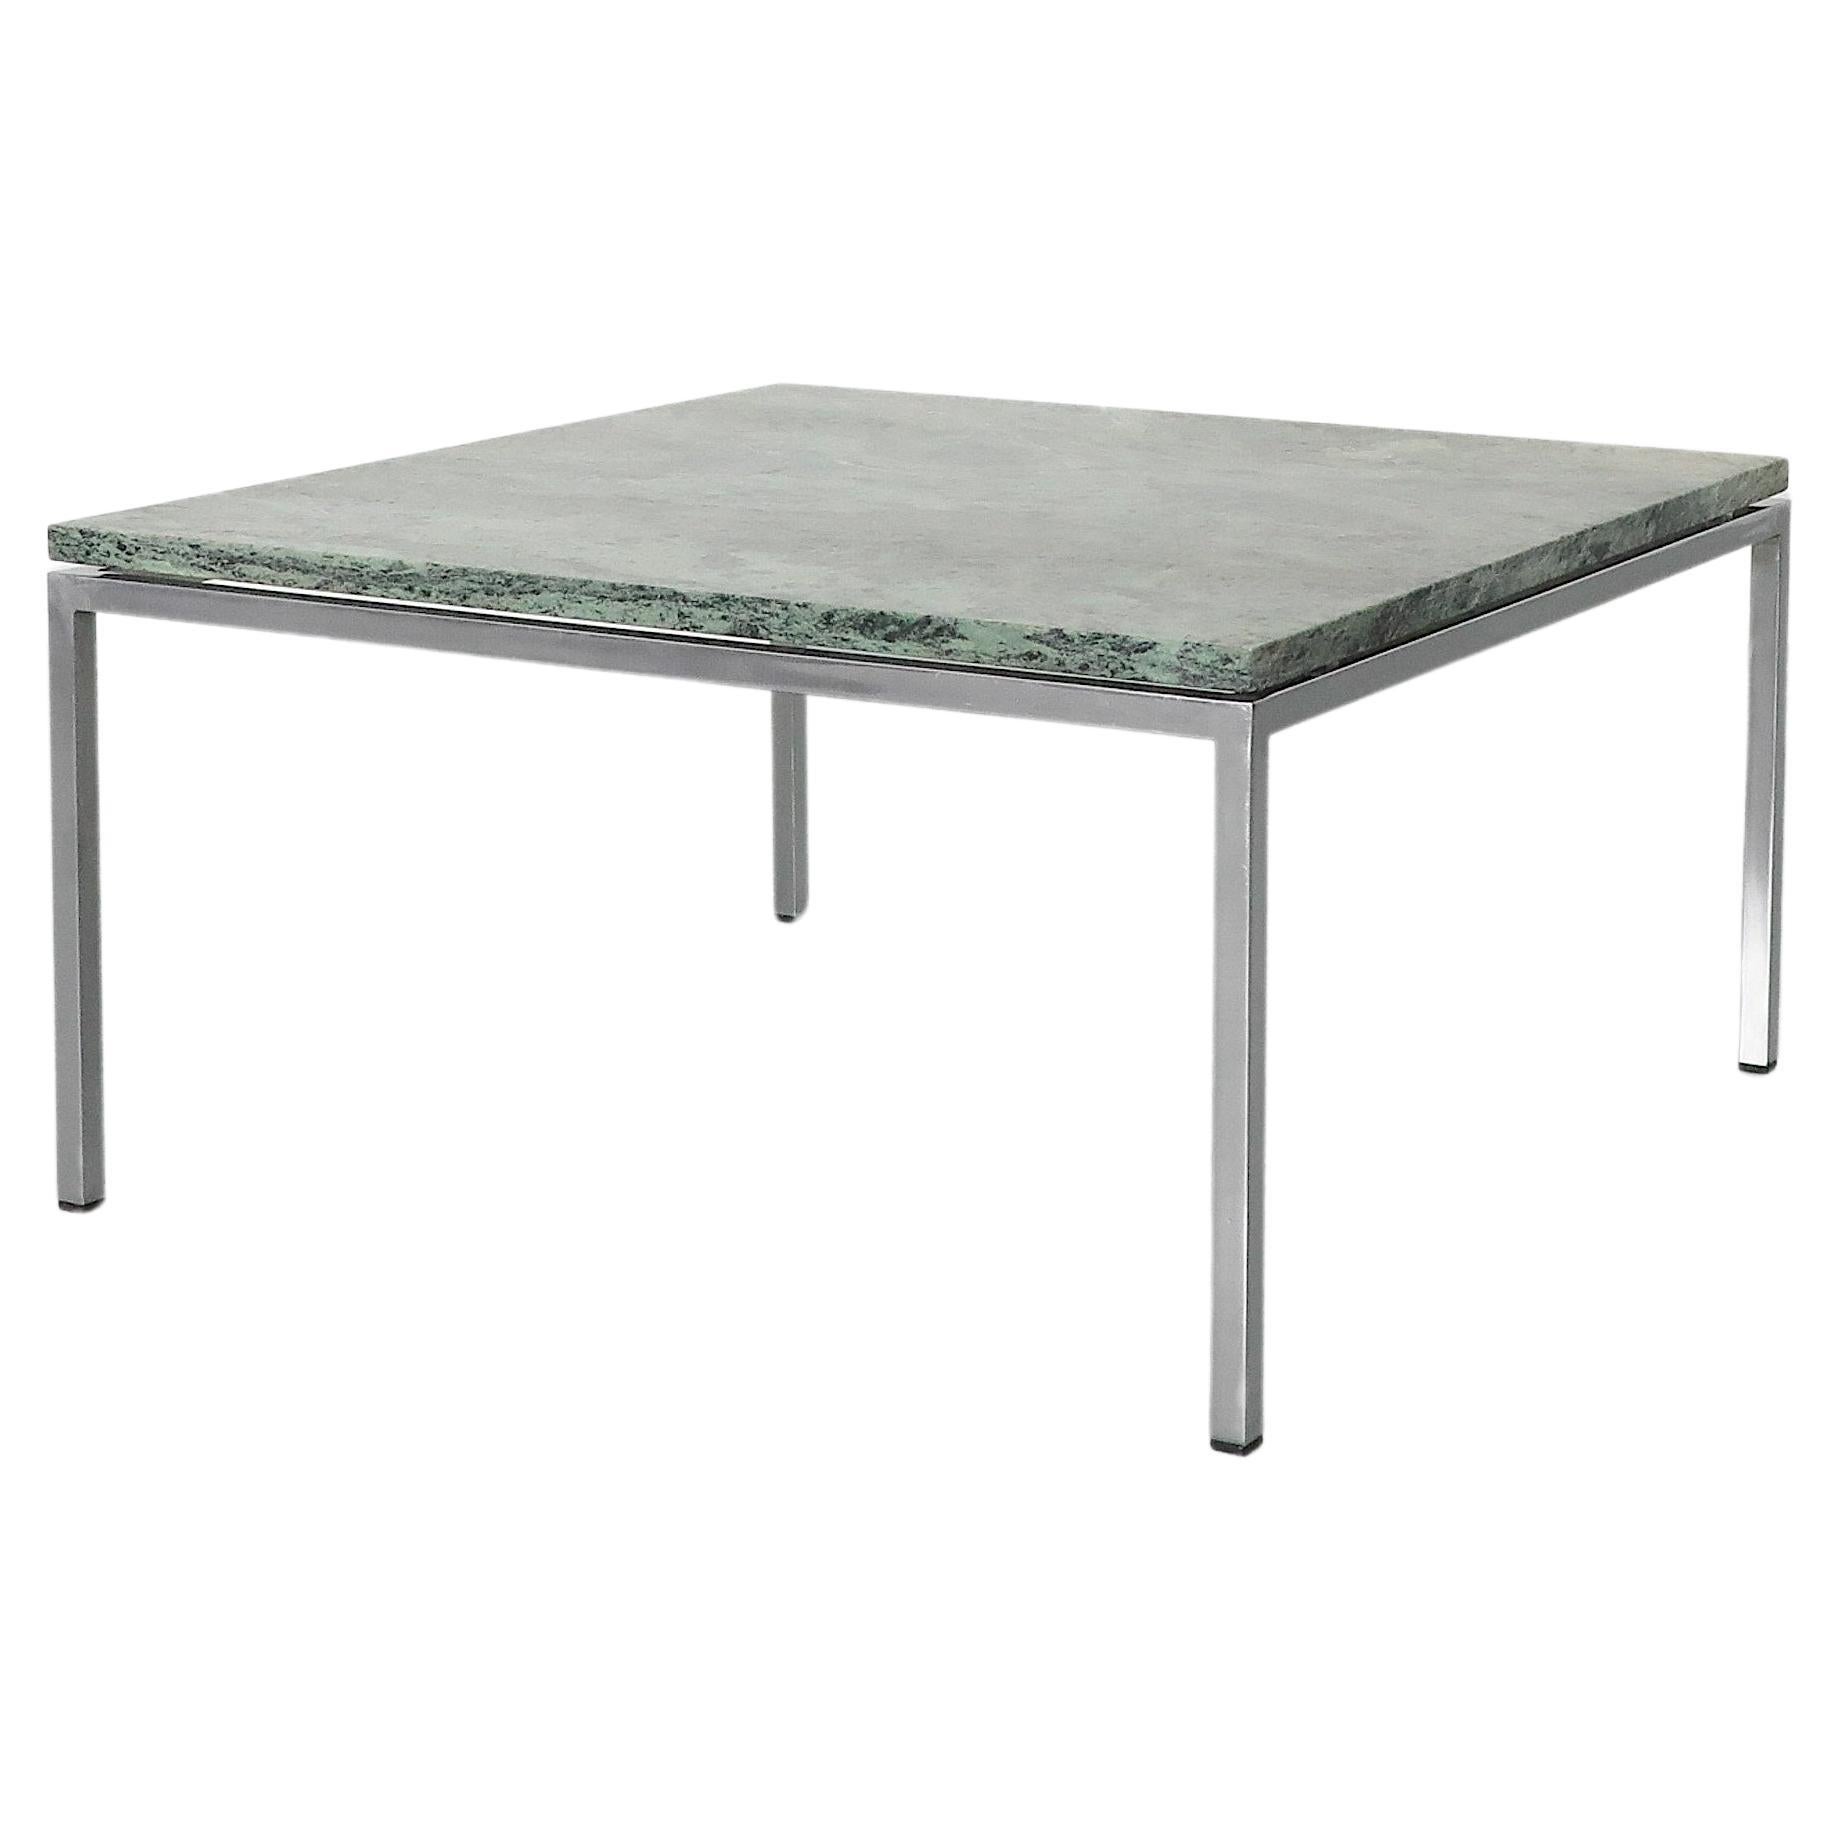 Metaform chrome coffee table with green marble top For Sale